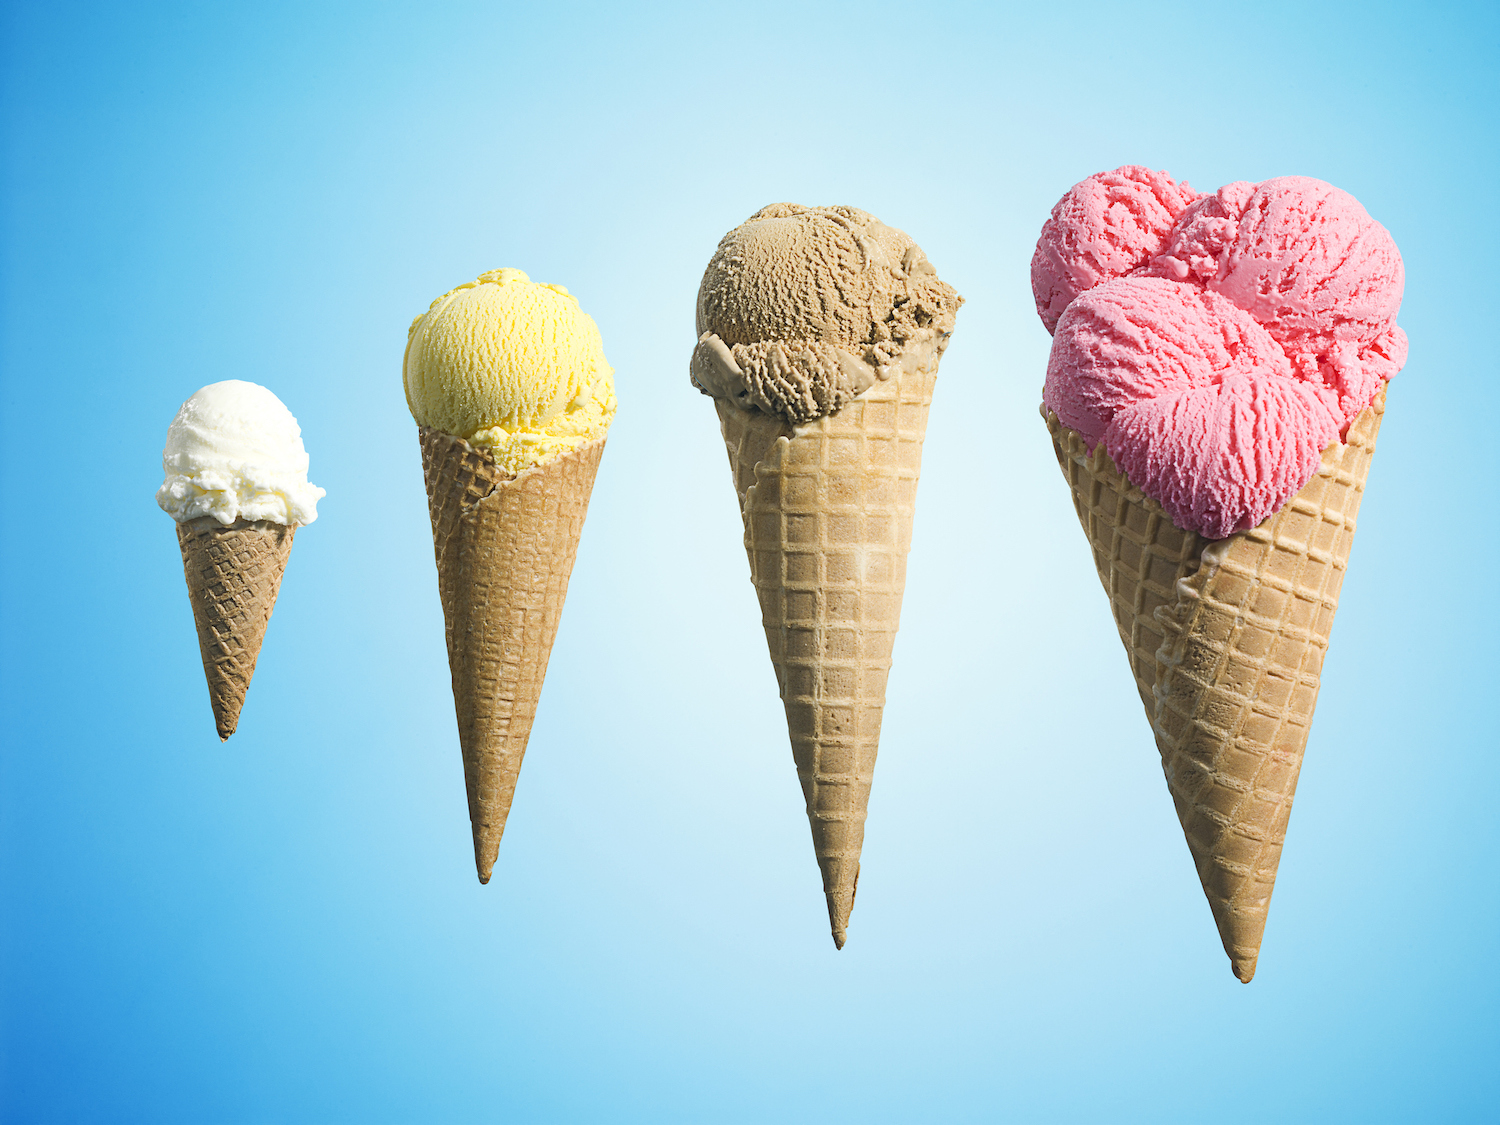 Row of different flavor ice creams in growth